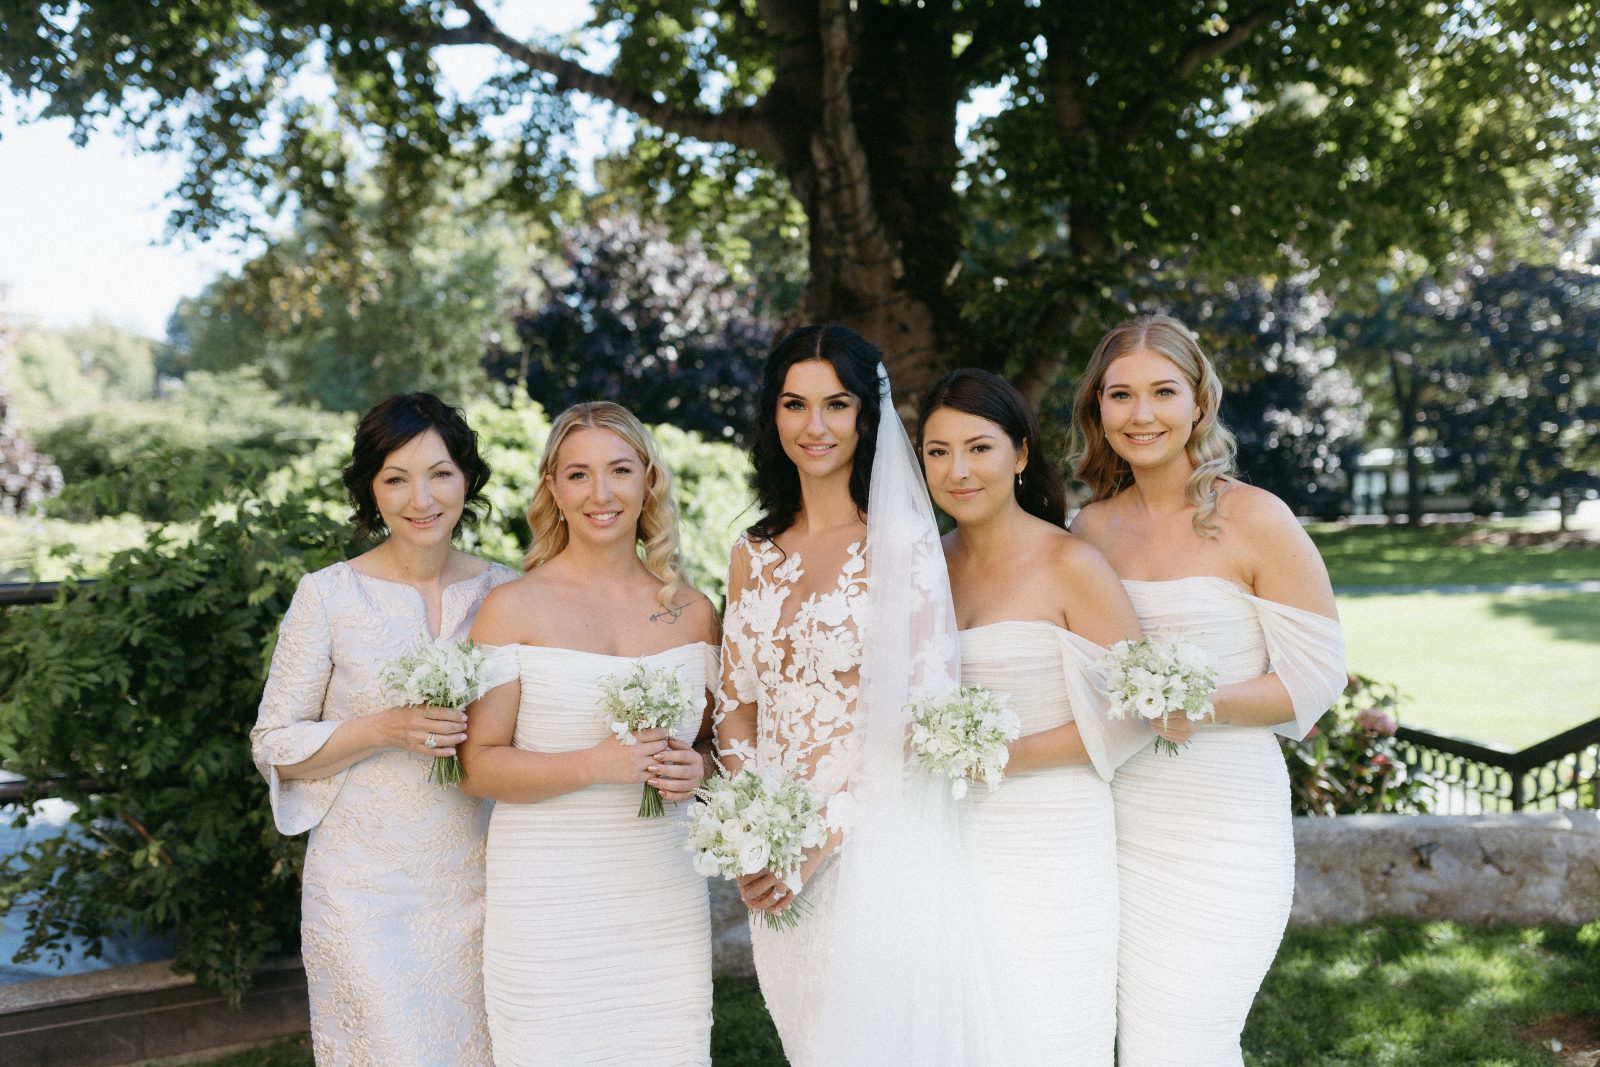 A Calyx bride with her four bridesmaids, all with delicate white posy bouquets